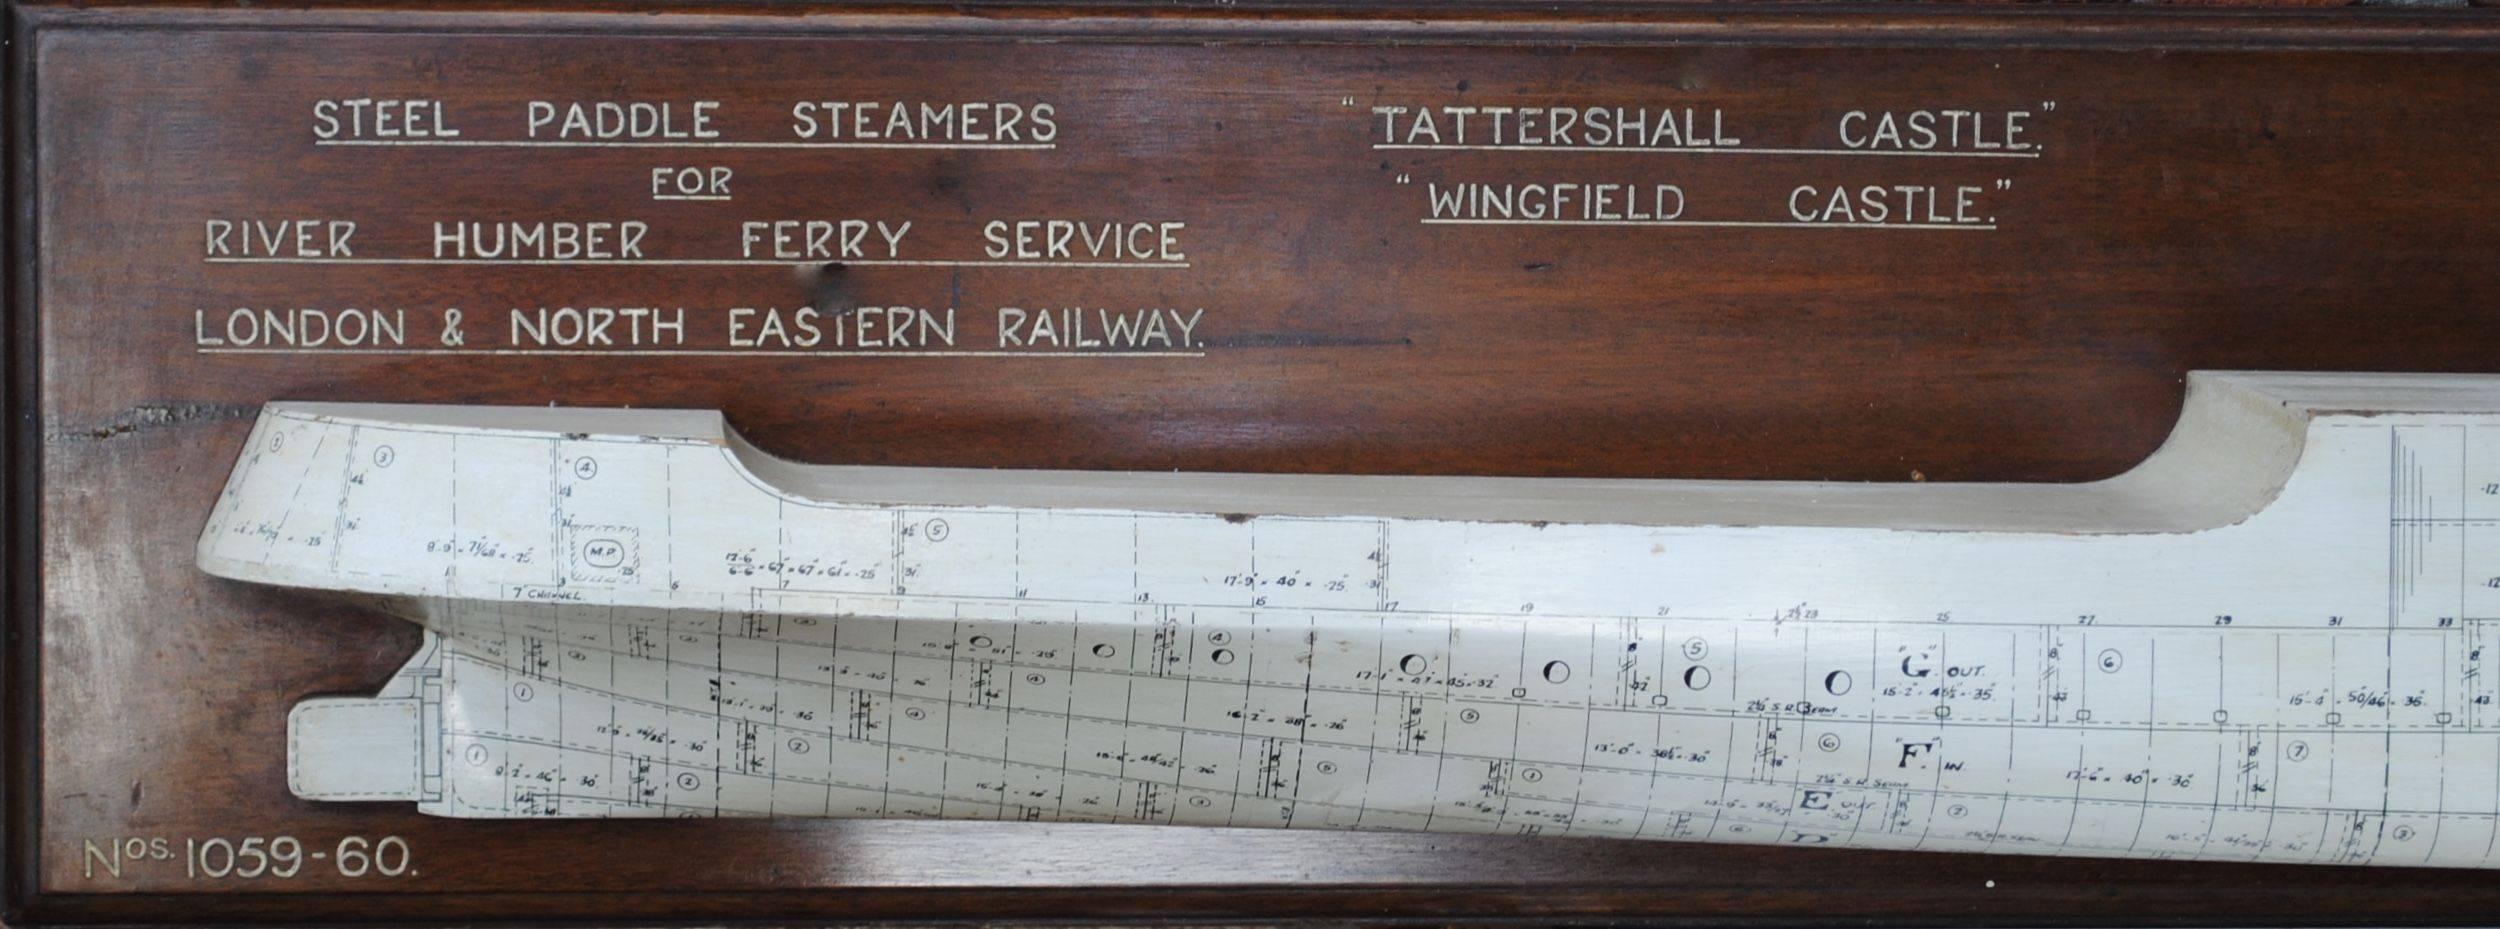 English Rare Platers Half Block Model for Steel Paddle Steamers